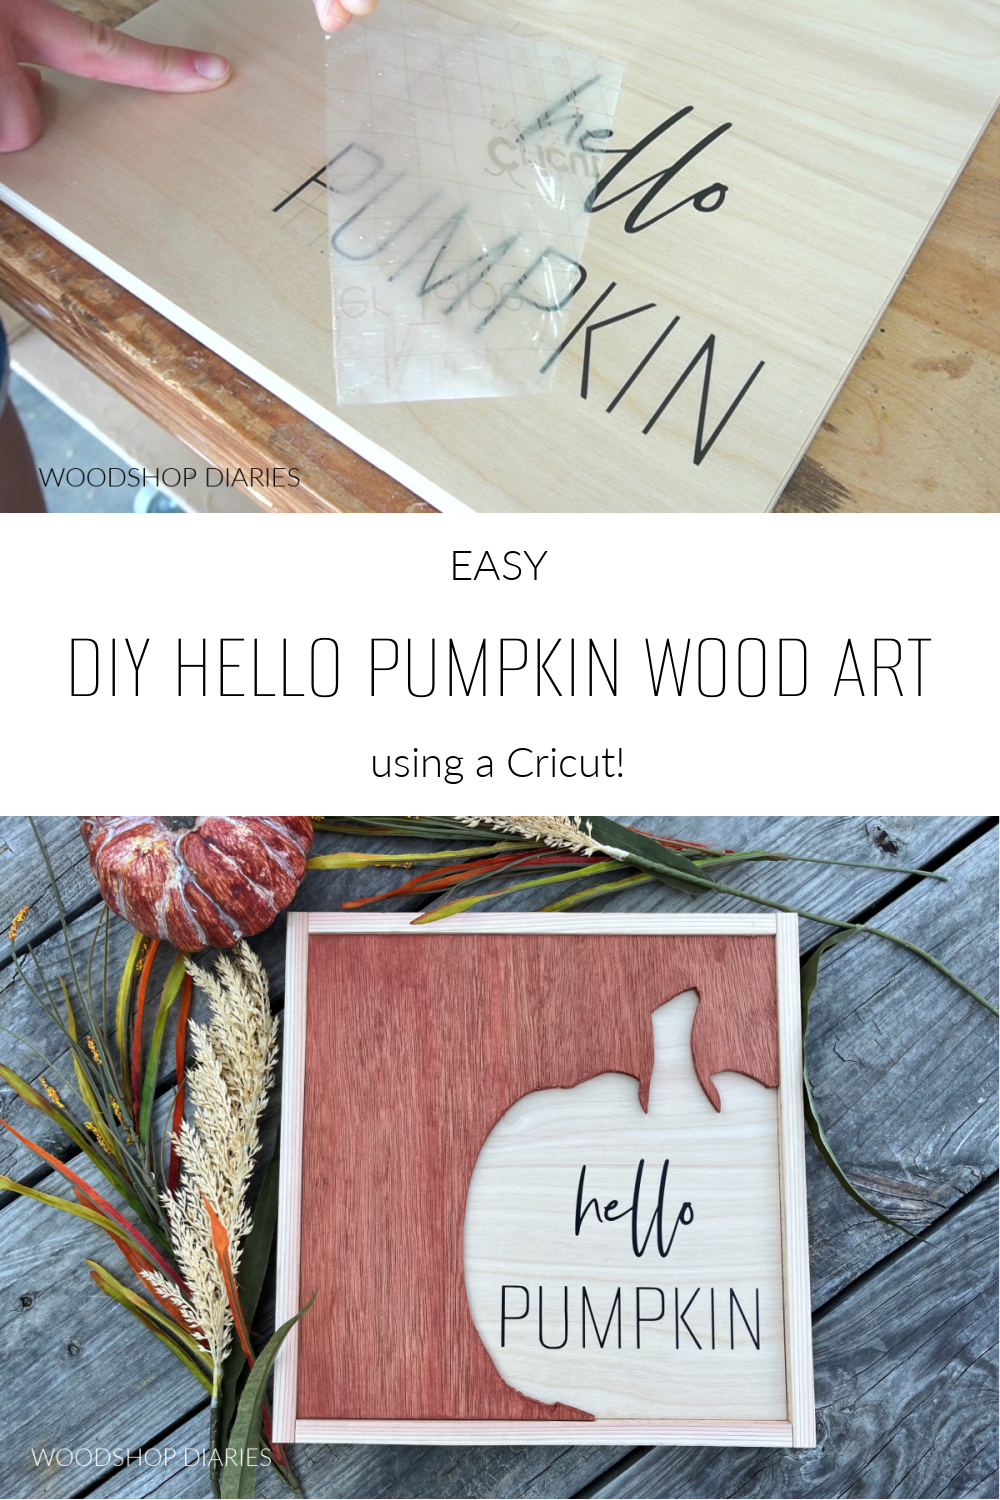 Pinterest collage image showing removing transfer tape from vinyl lettering at top and completed hello pumpkin sign at bottom with text "easy DIY hello pumpkin wood art using a cricut!"